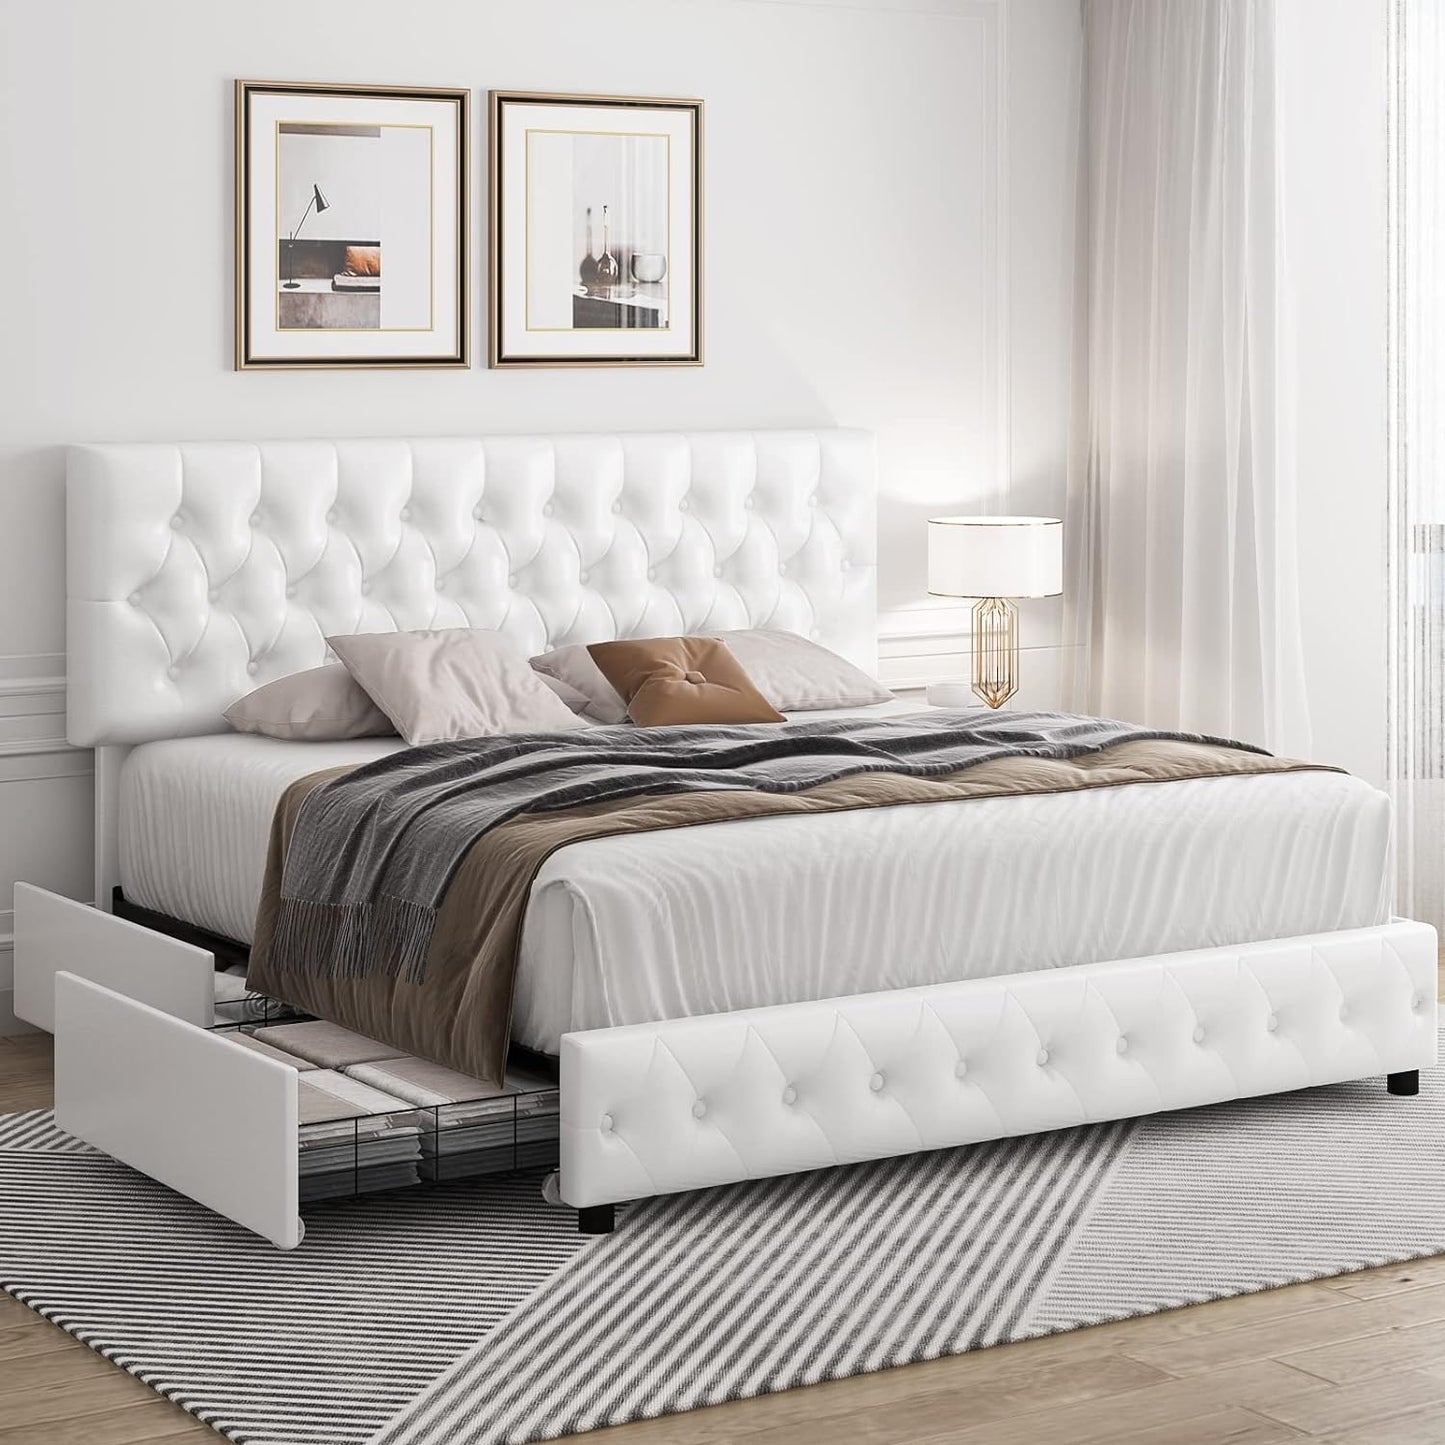 Modern Upholstered Bed Frame with 4 Drawers, Button Tufted Headboard Design, Solid Wooden Slat Support, Easy Assembly, Queen Size, White